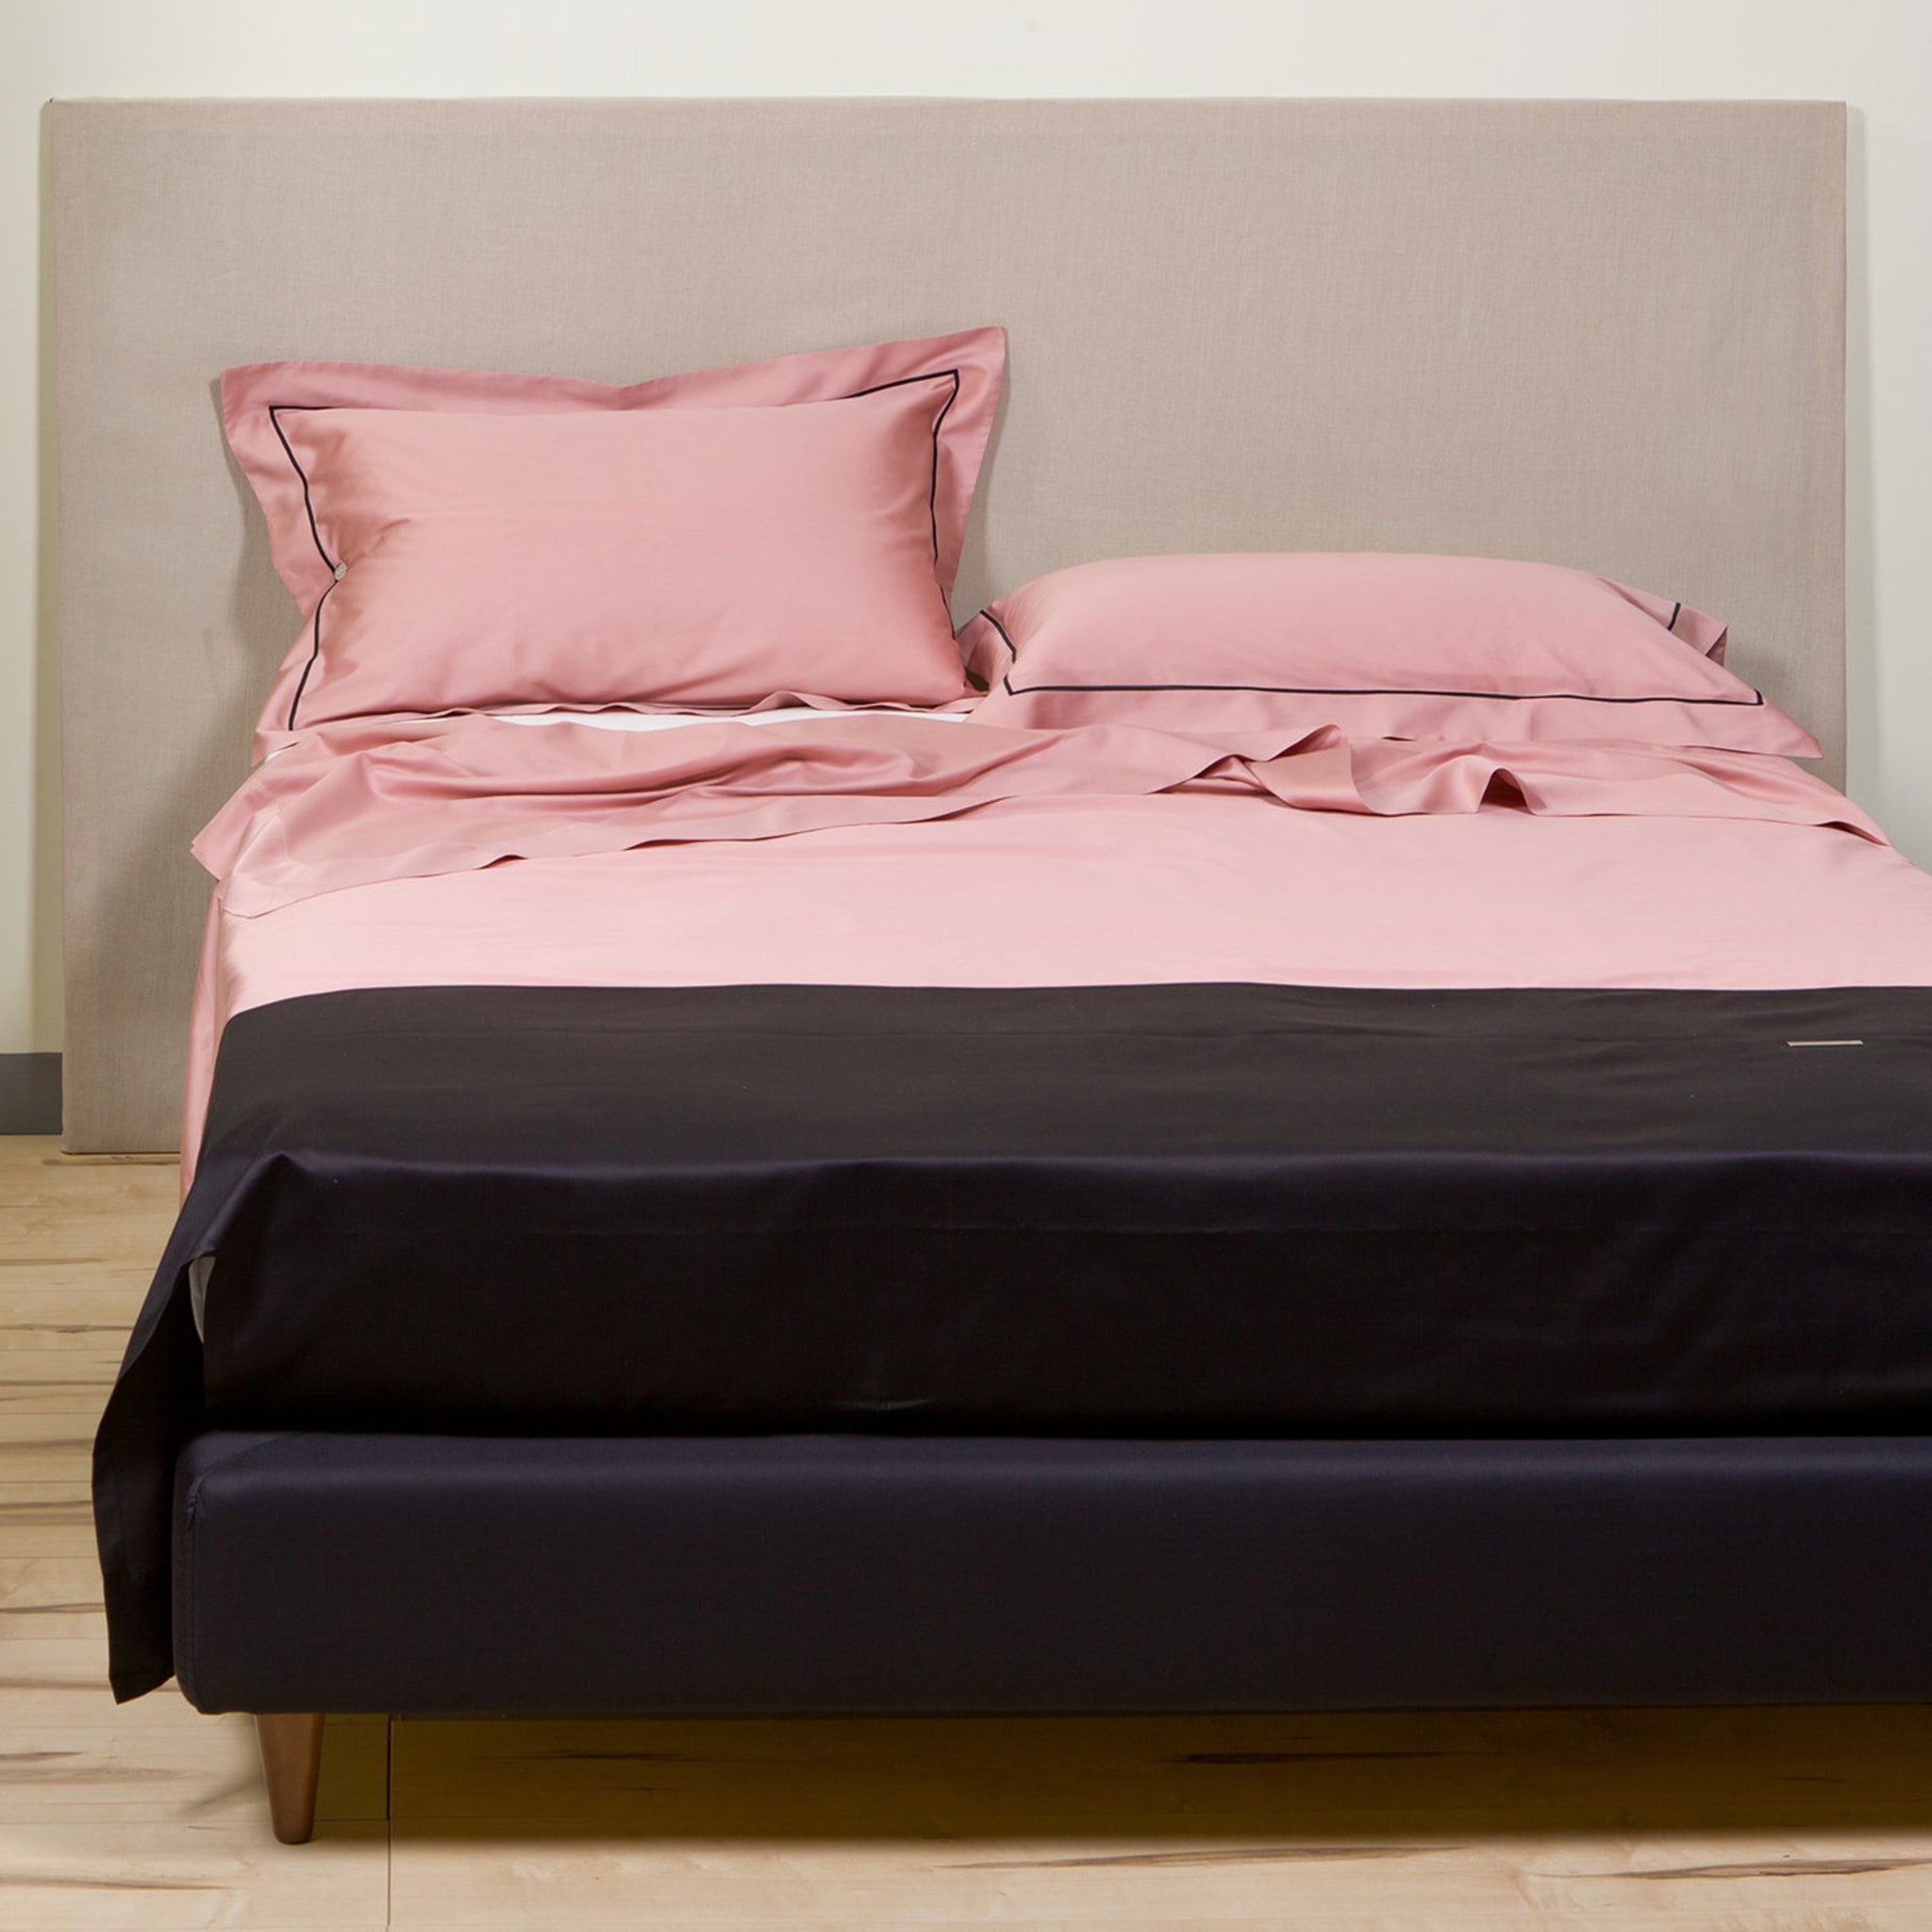 Summer Bedding Set - Nude and Black - Alternative view 1